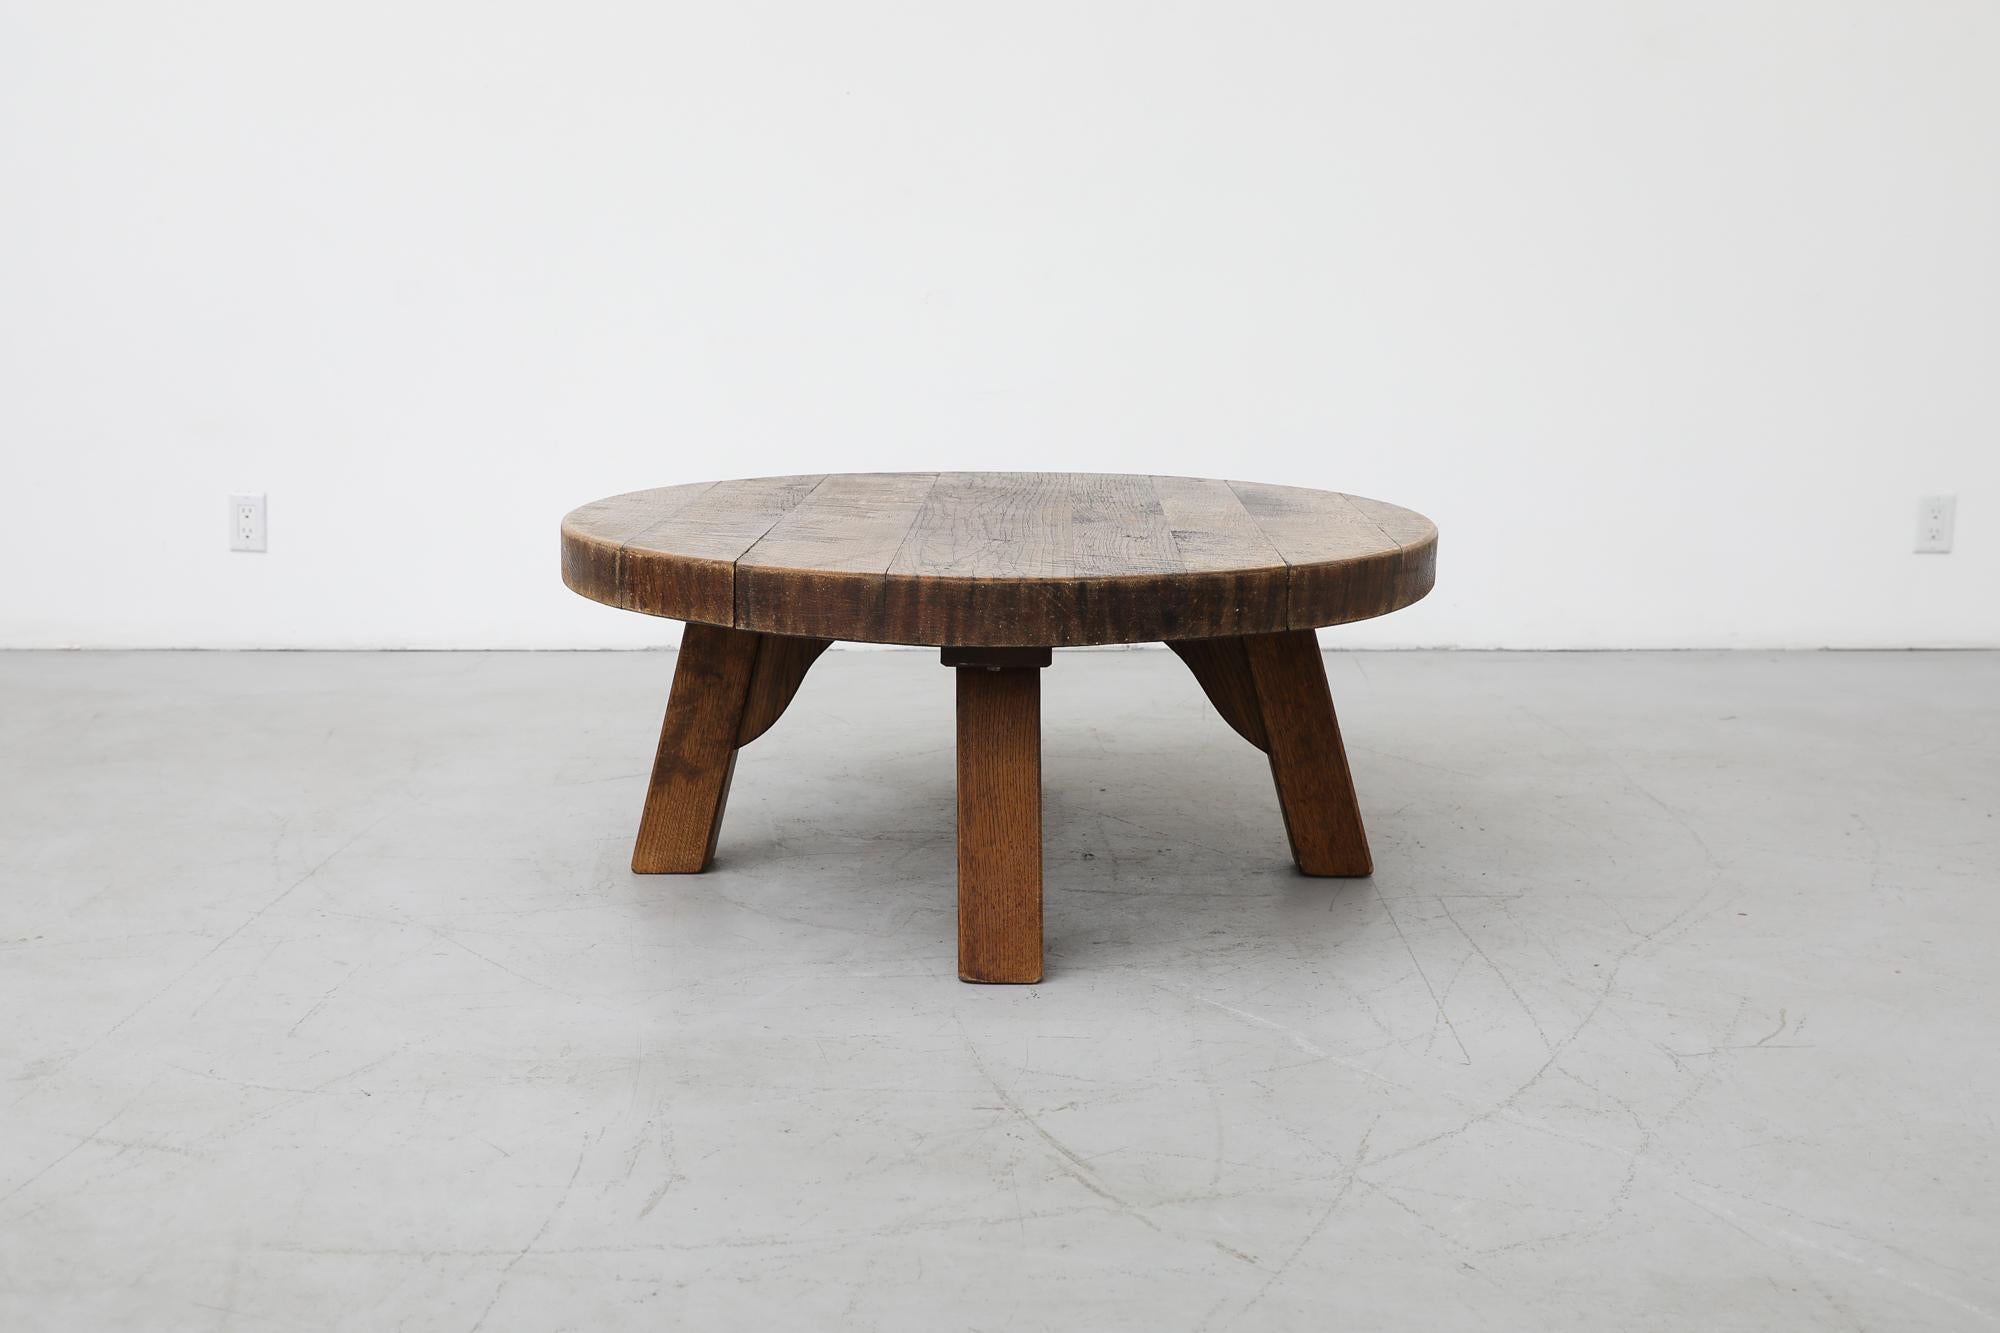 Heavy Pierre Chapo style round Brutalist coffee table is made from solid oak and has three sturdy square legs. In original condition with visible wear and patina consistent with its age and use.